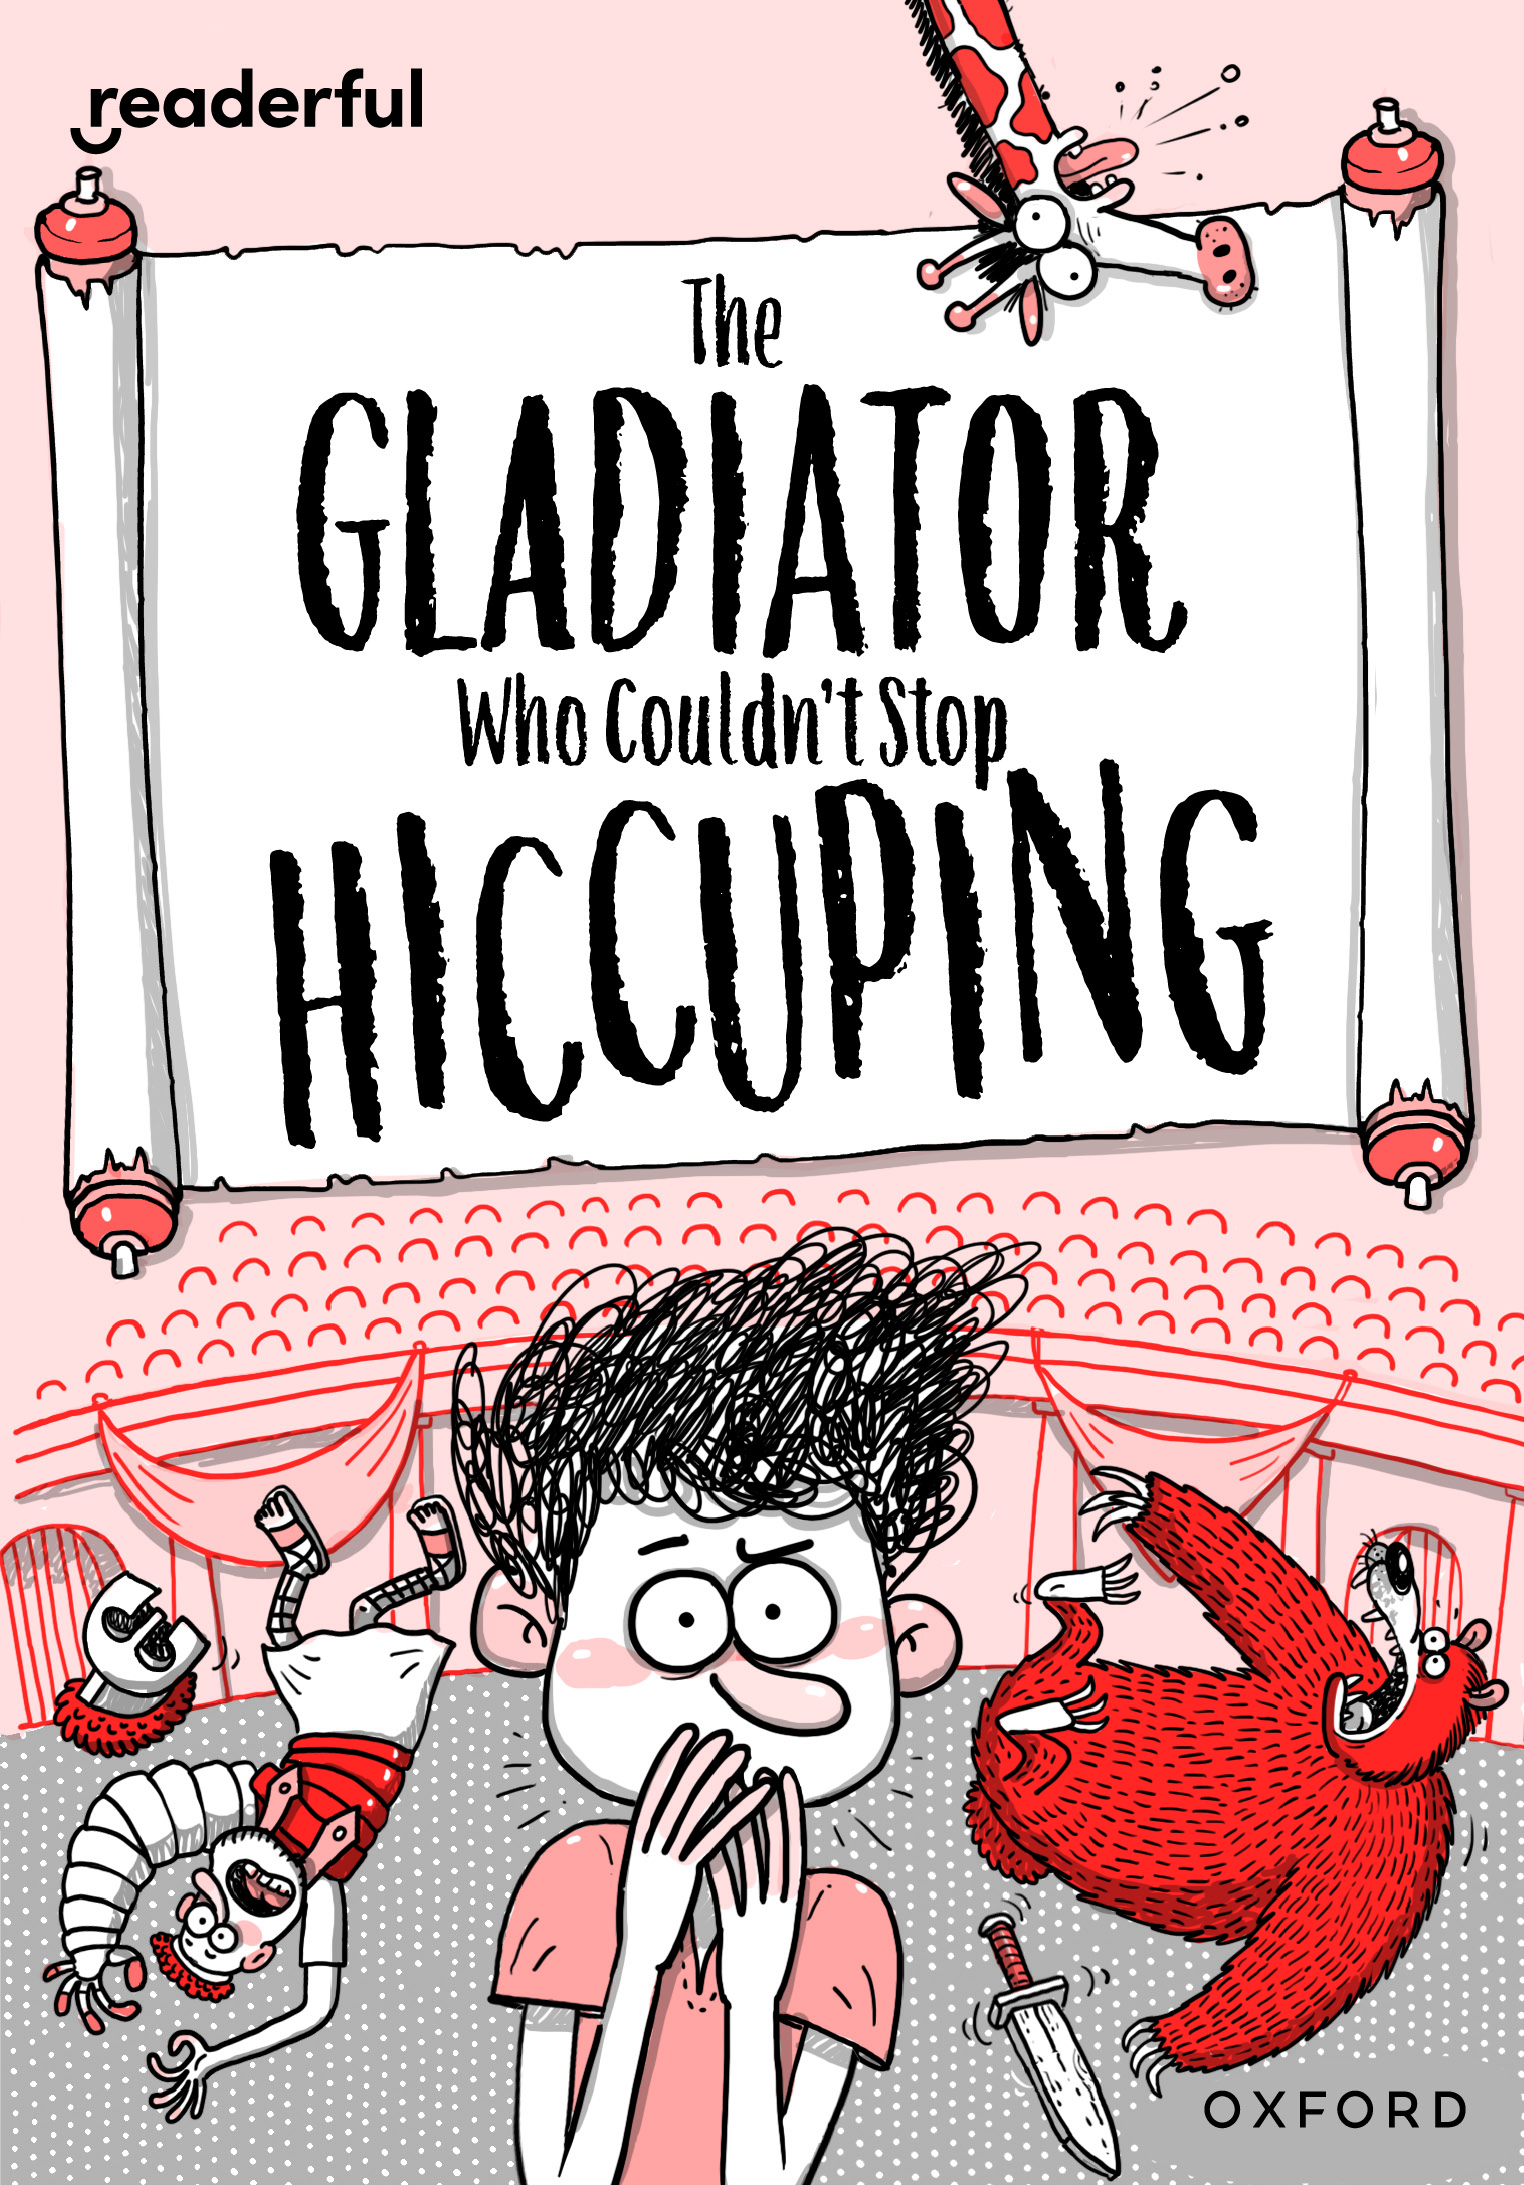 The Gladiator Who Couldn’t Stop Hiccuping